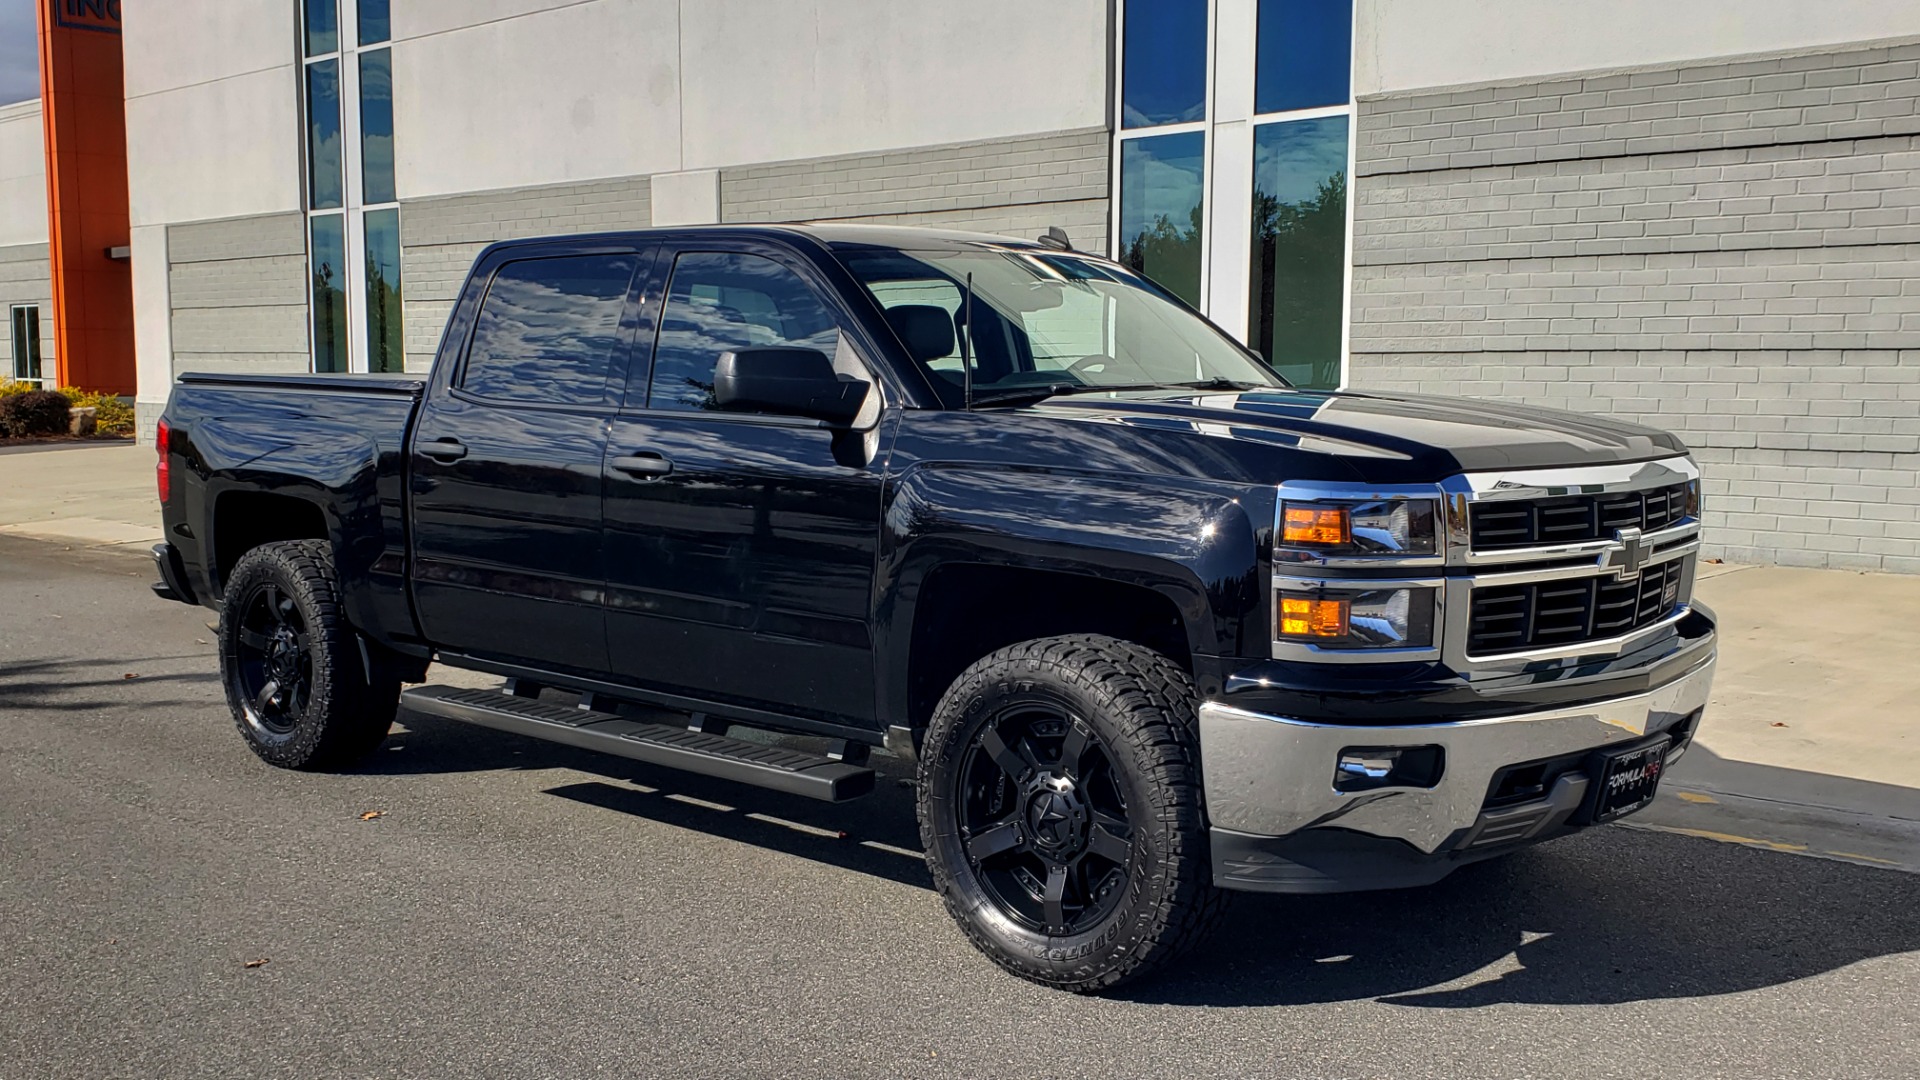 Used 2014 Chevrolet SILVERADO 1500 LT CREWCAB Z71 2LT / 5.3L V8 / AUTO / CONV PKG / TOW / REARVIEW for sale Sold at Formula Imports in Charlotte NC 28227 6